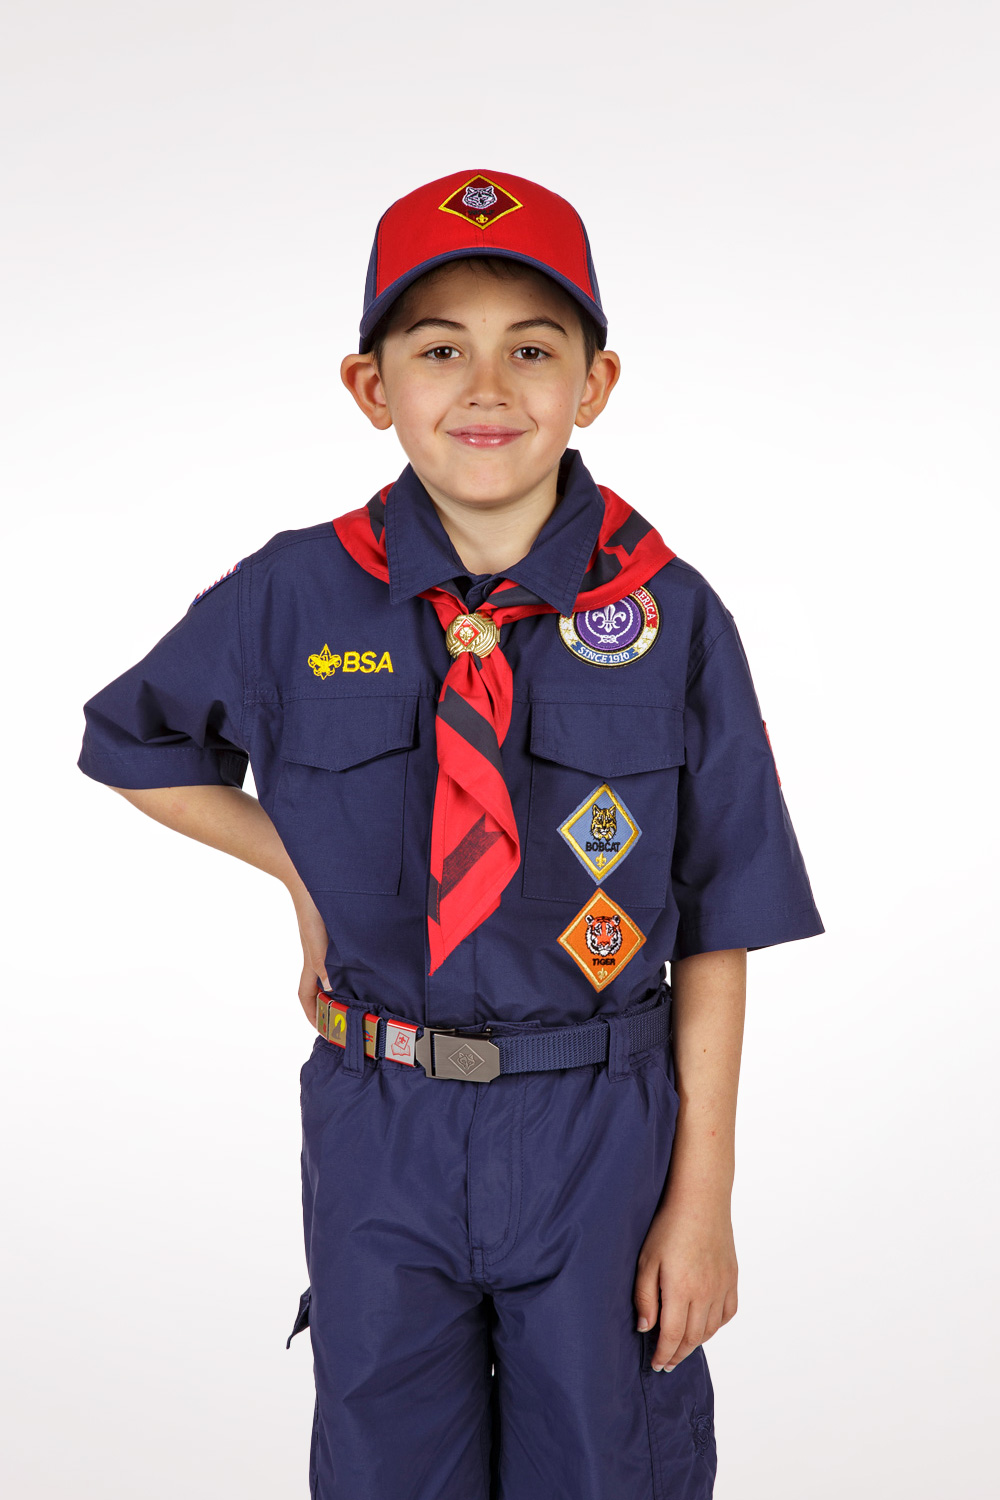 Scout Shop - Trying to figure out the whole uniform thing for